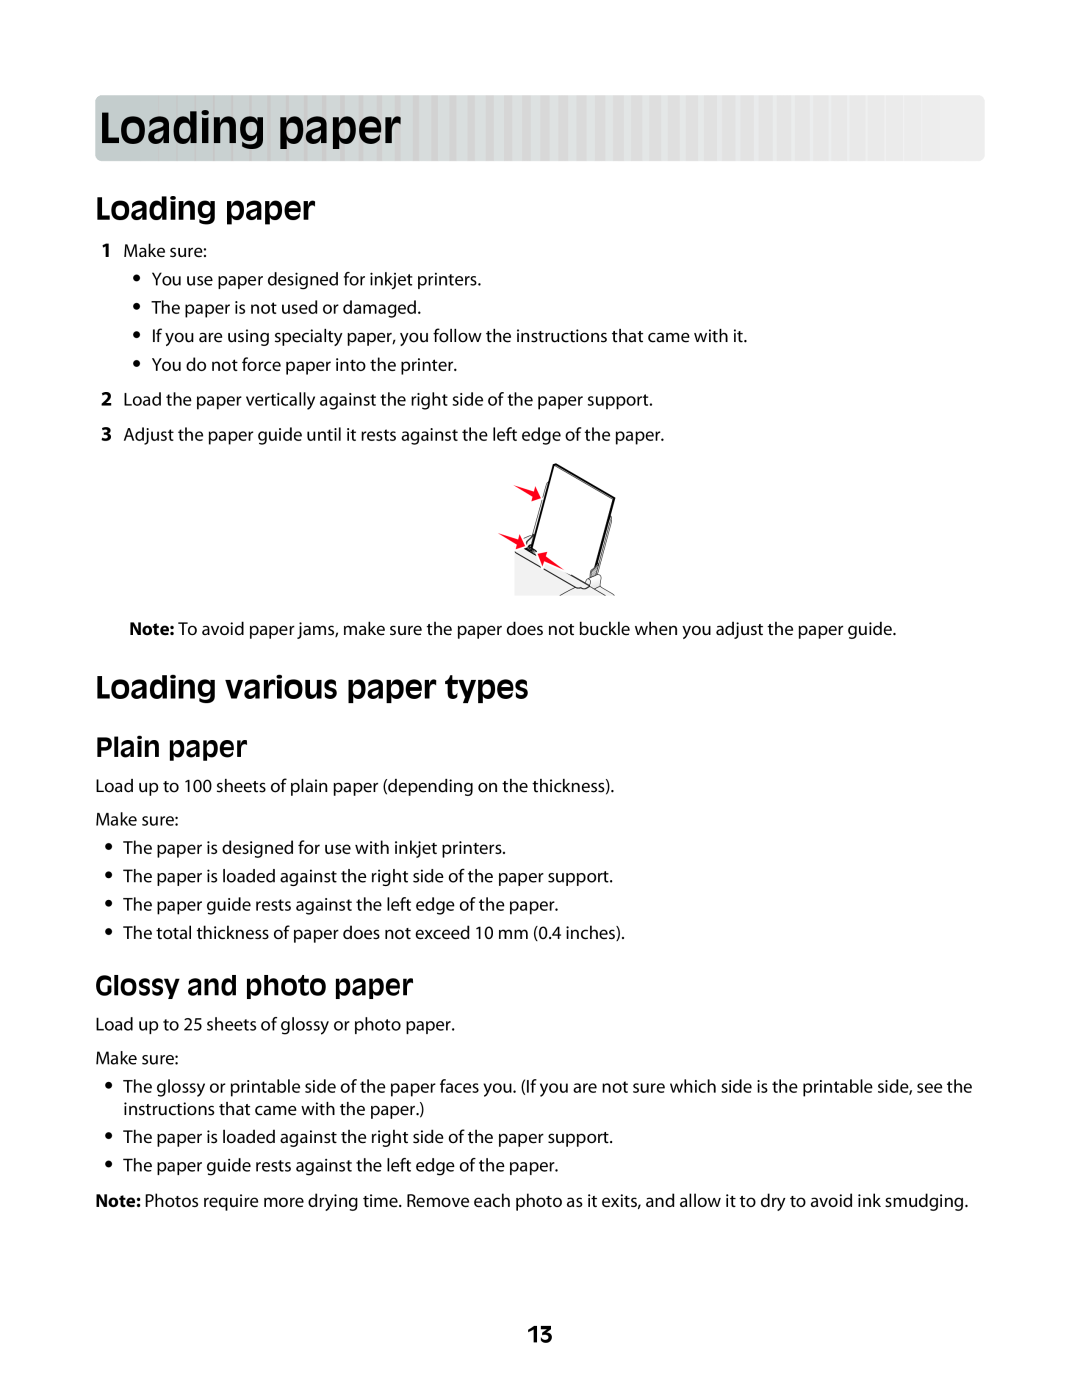 Lexmark Z2300 manual Loading paper, Loading various paper types, Plain paper, Glossy and photo paper 